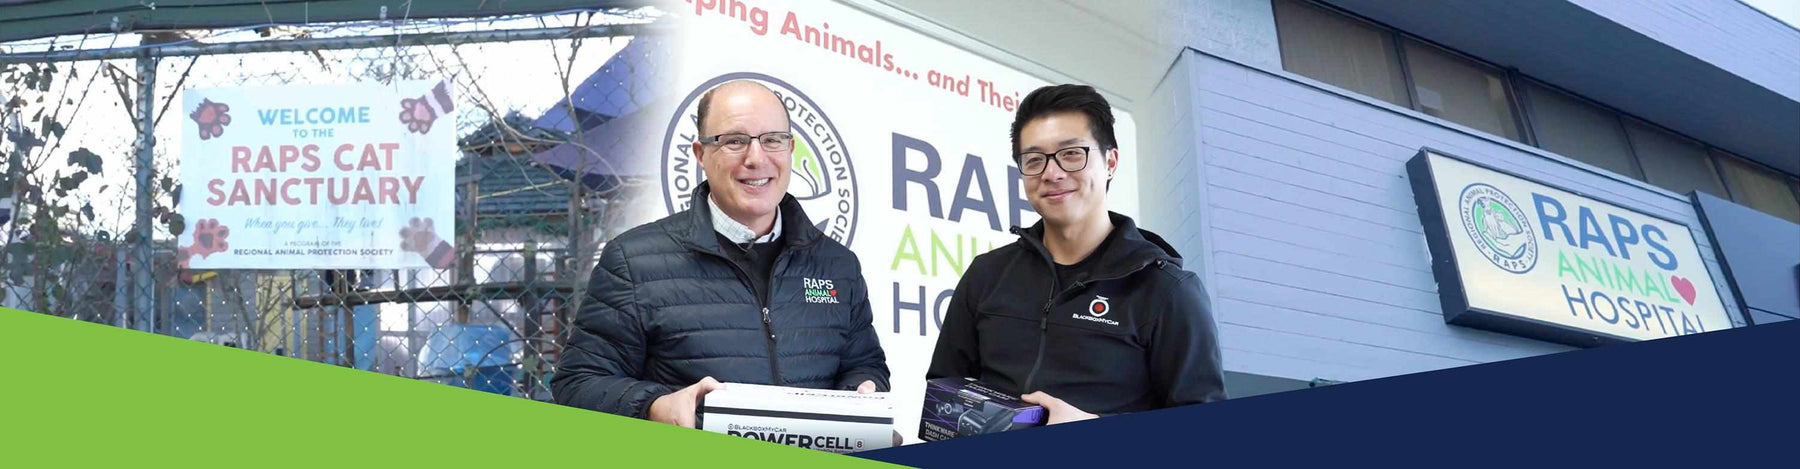 BlackboxMyCar | Helping Out In the Community - Protecting the Regional Animal Protection Society (RAPS) with Dash Cam and Battery Pack - - BlackboxMyCar Canada